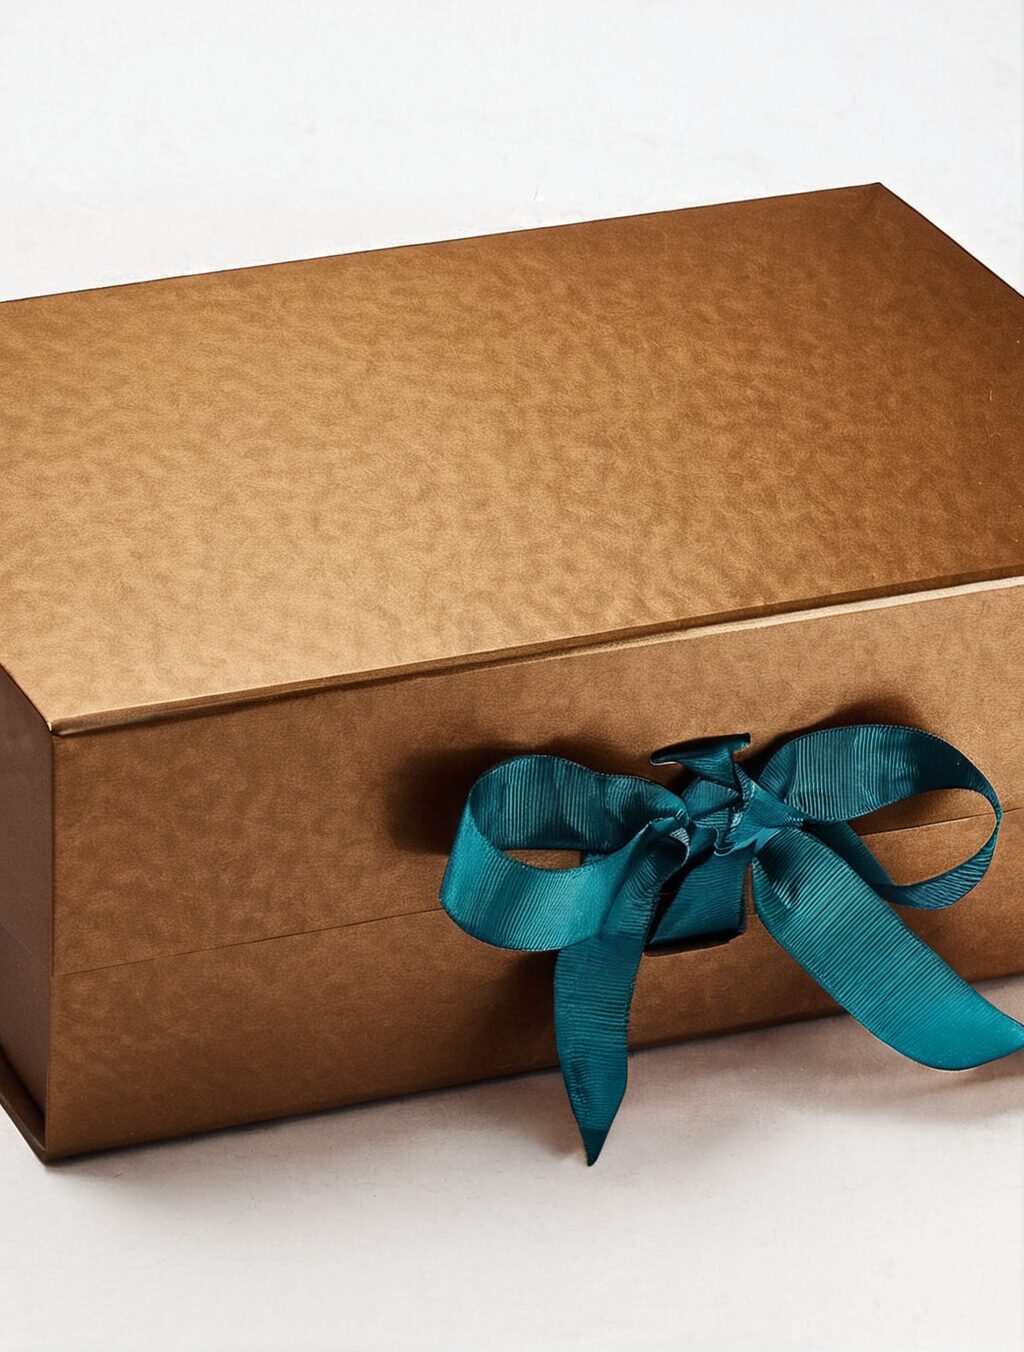 gift boxes and packaging